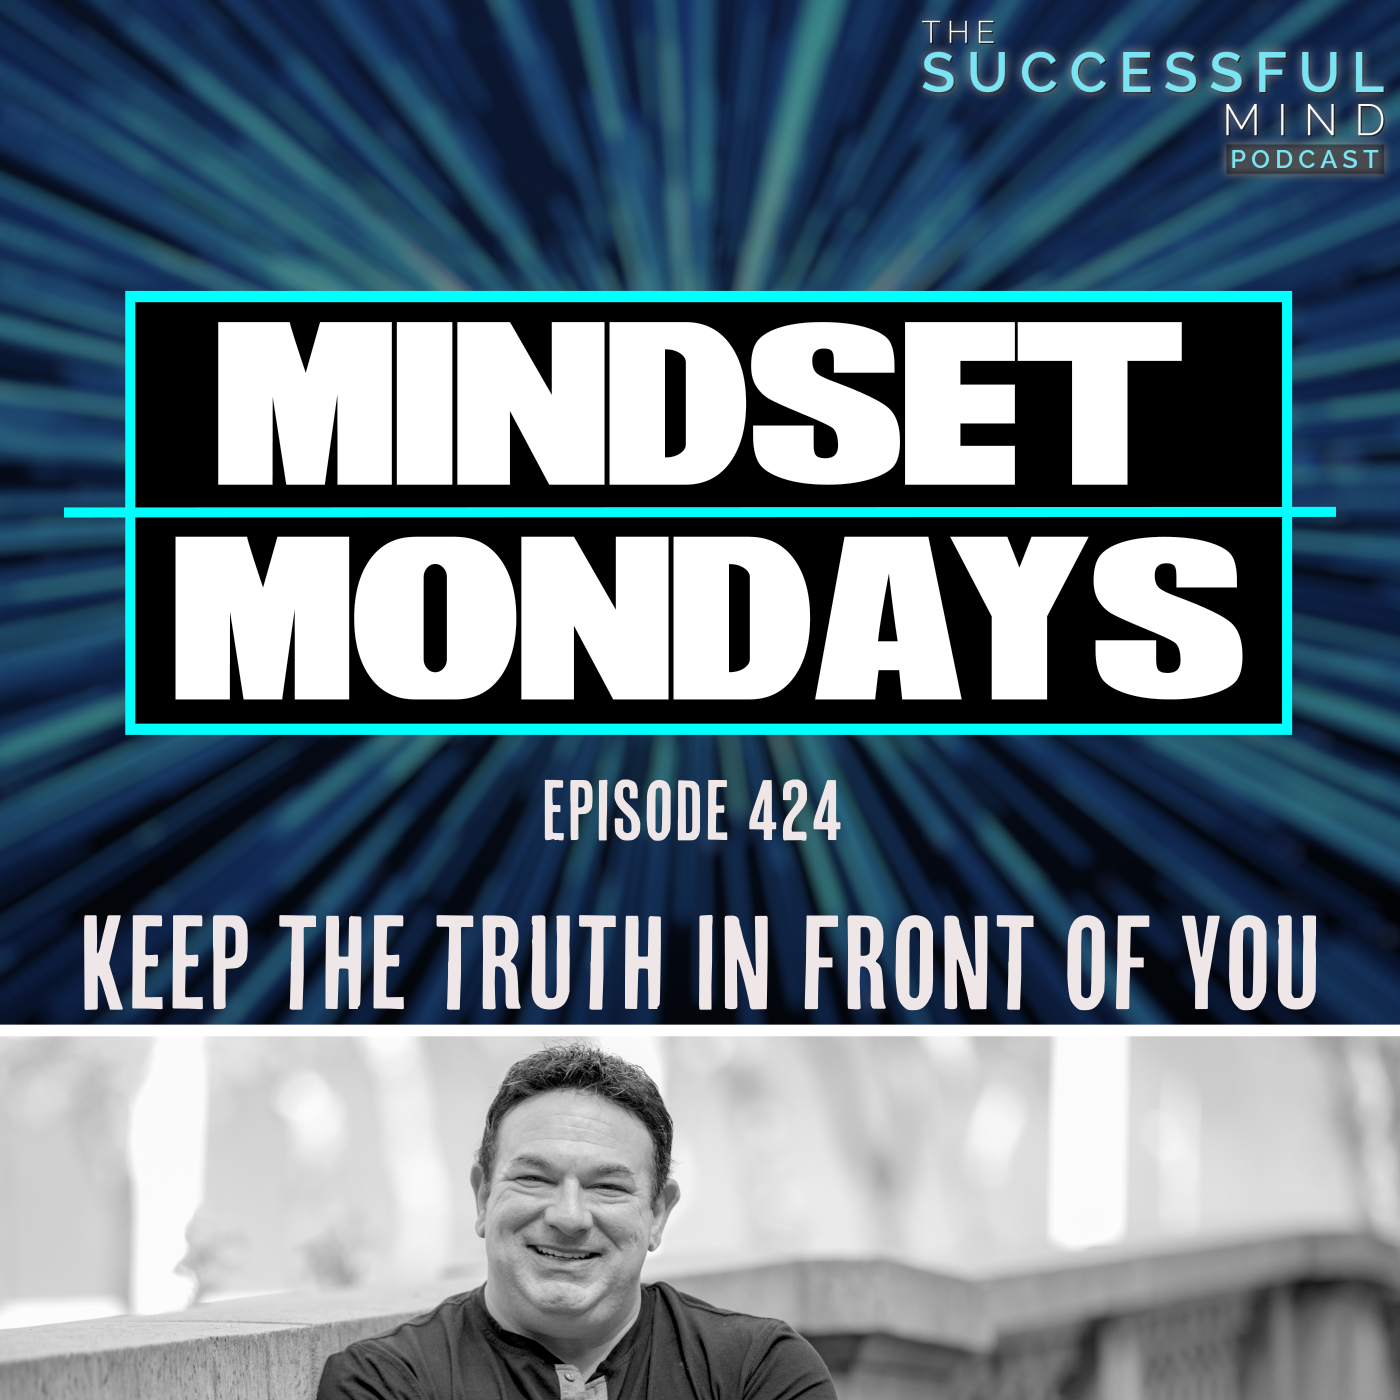 The Successful Mind Podcast - Episode 424 - Keep the Truth in Front of You